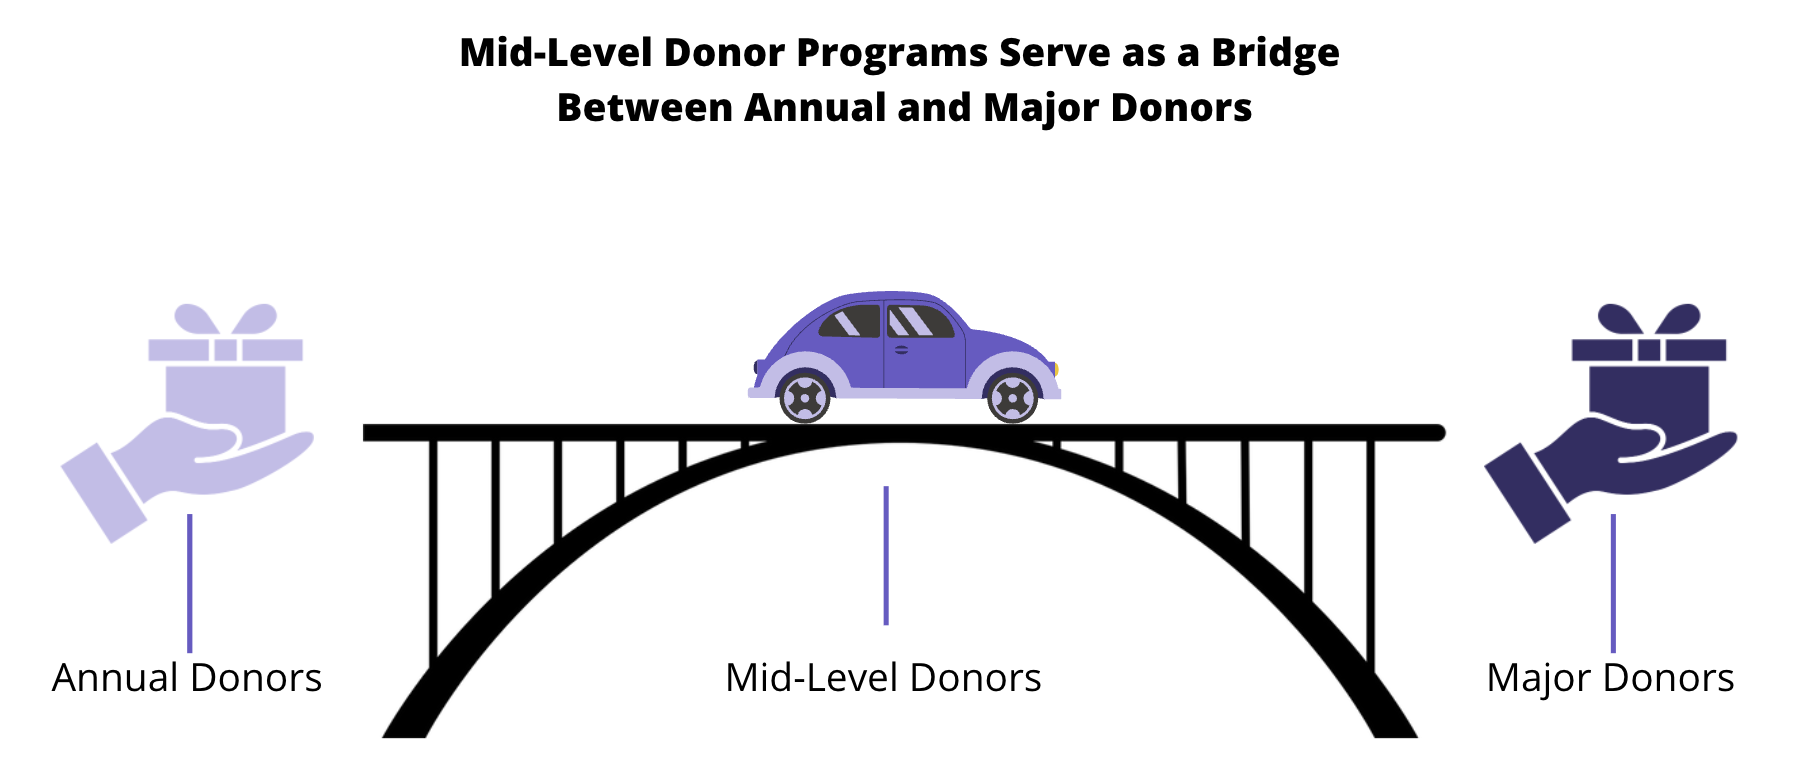 Mid-level donor program acts as the bridge between annual and major donors